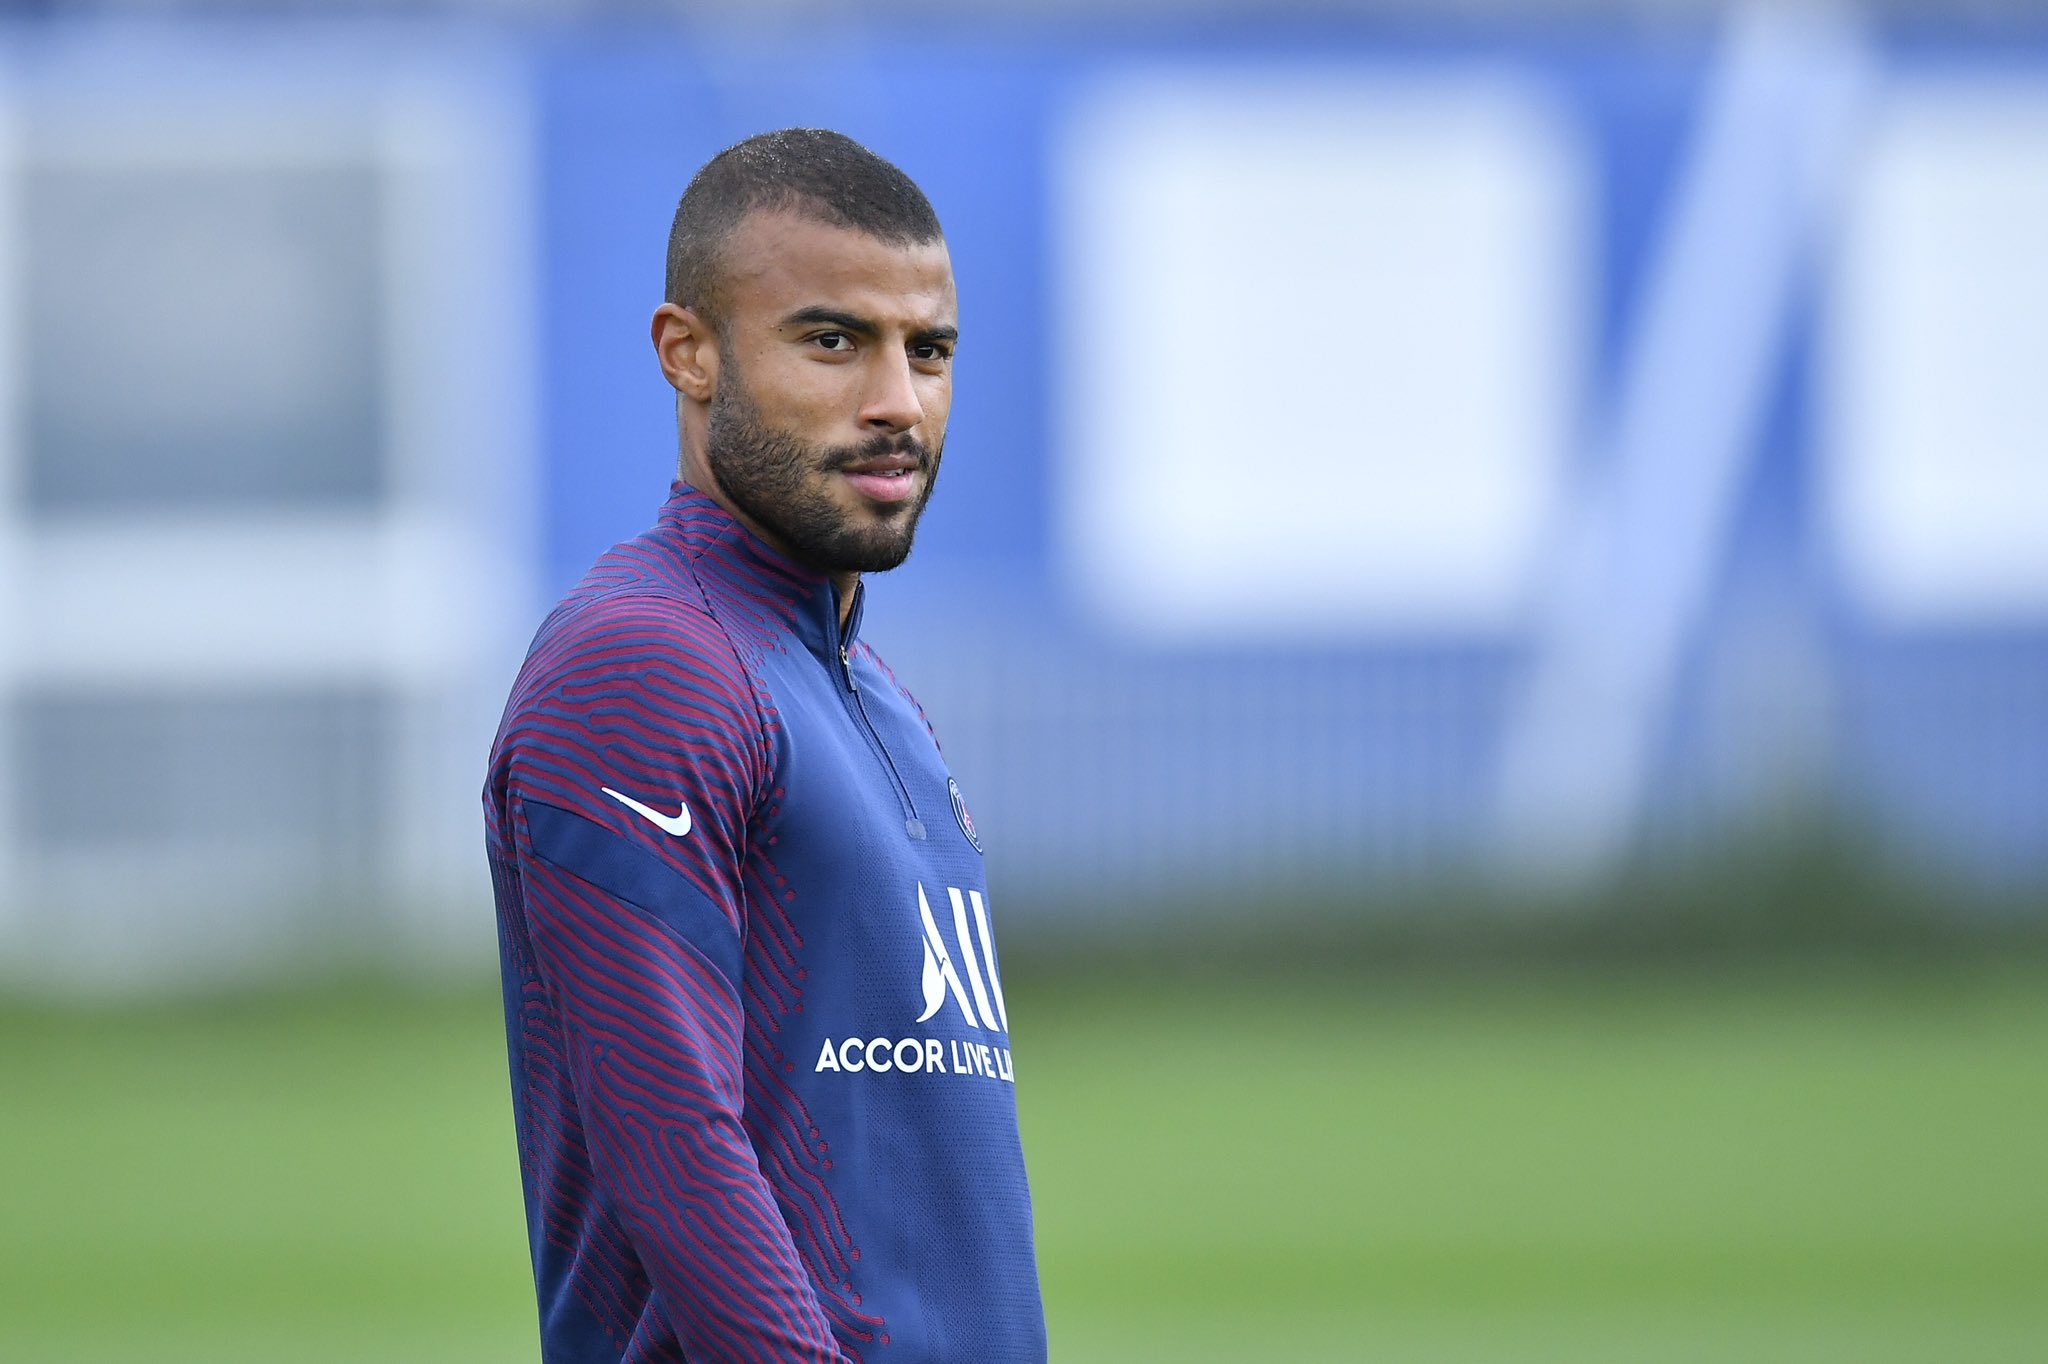 Paris Saint-Germain have an opportunity to respond after Remontada, claims Rafinha